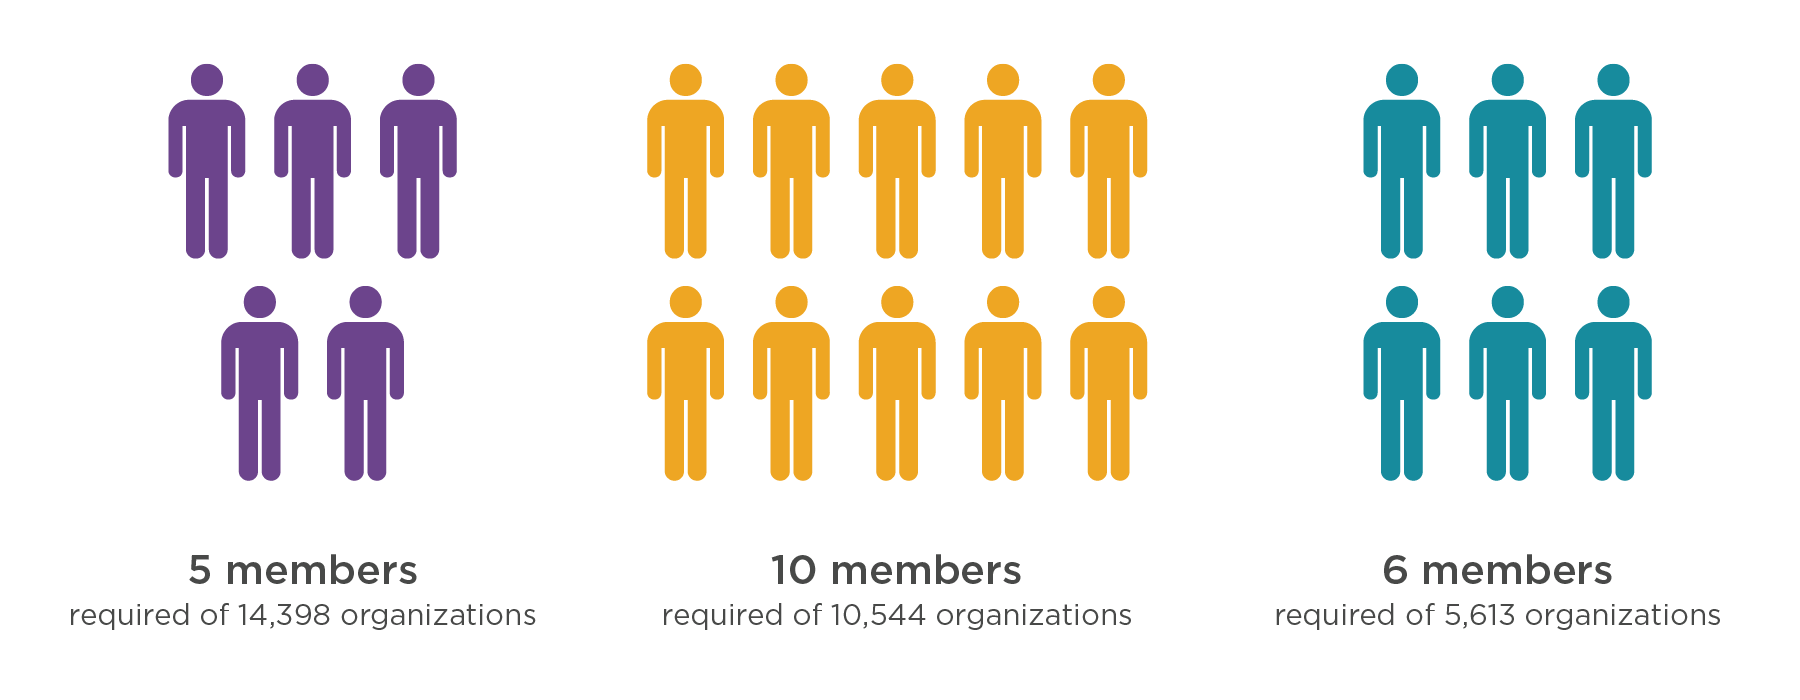 Number of members required per size of organization